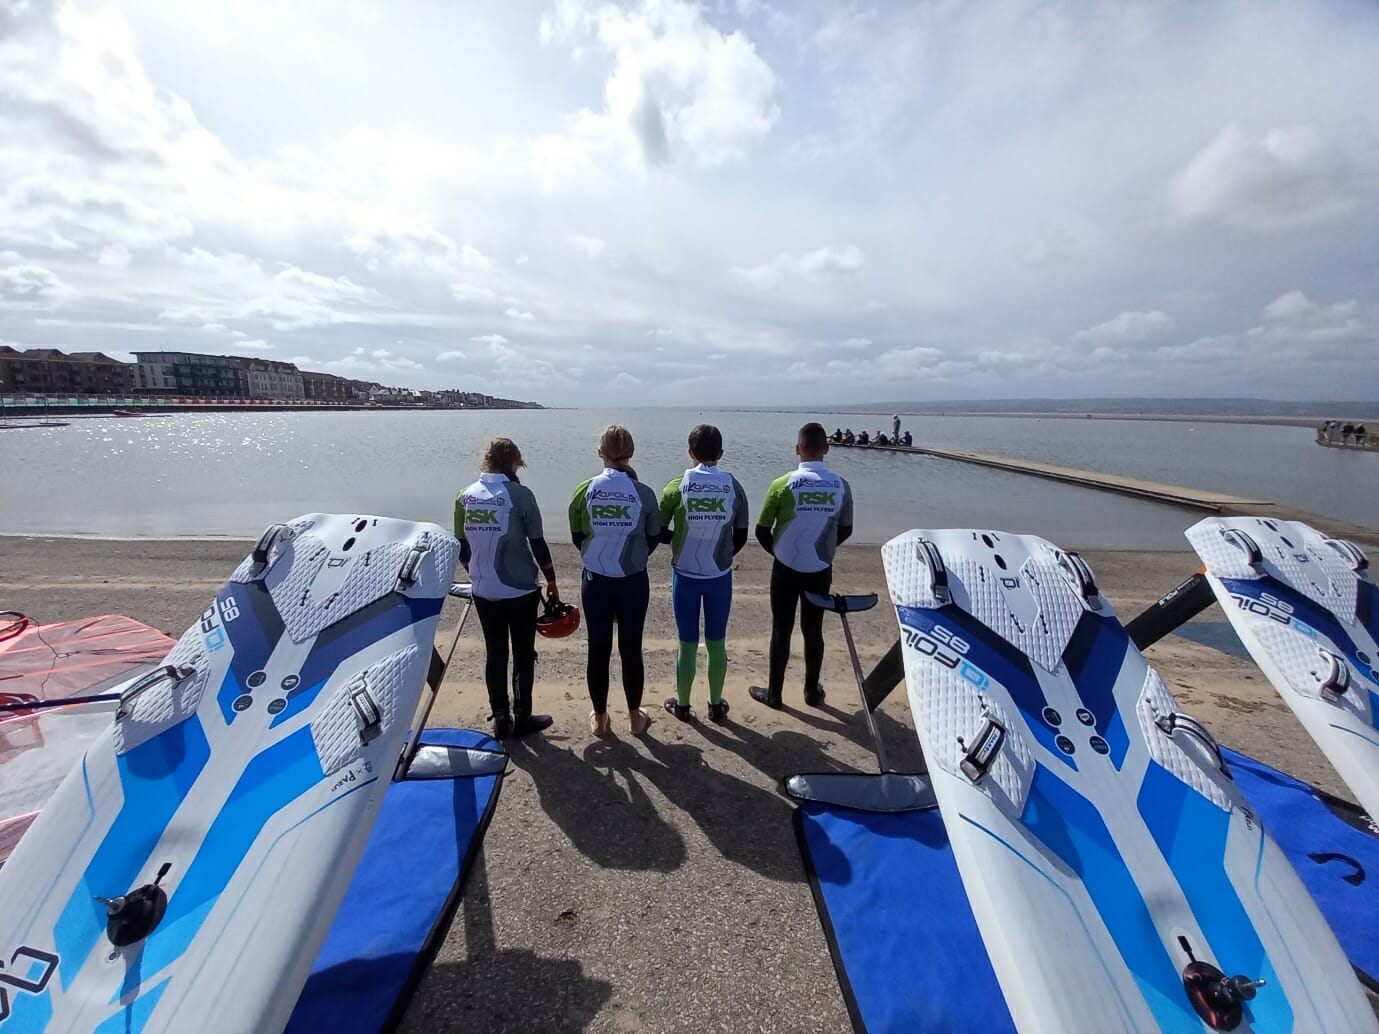 RSK backs new Olympic youth windsurfing scheme, opening up opportunities to UK youth